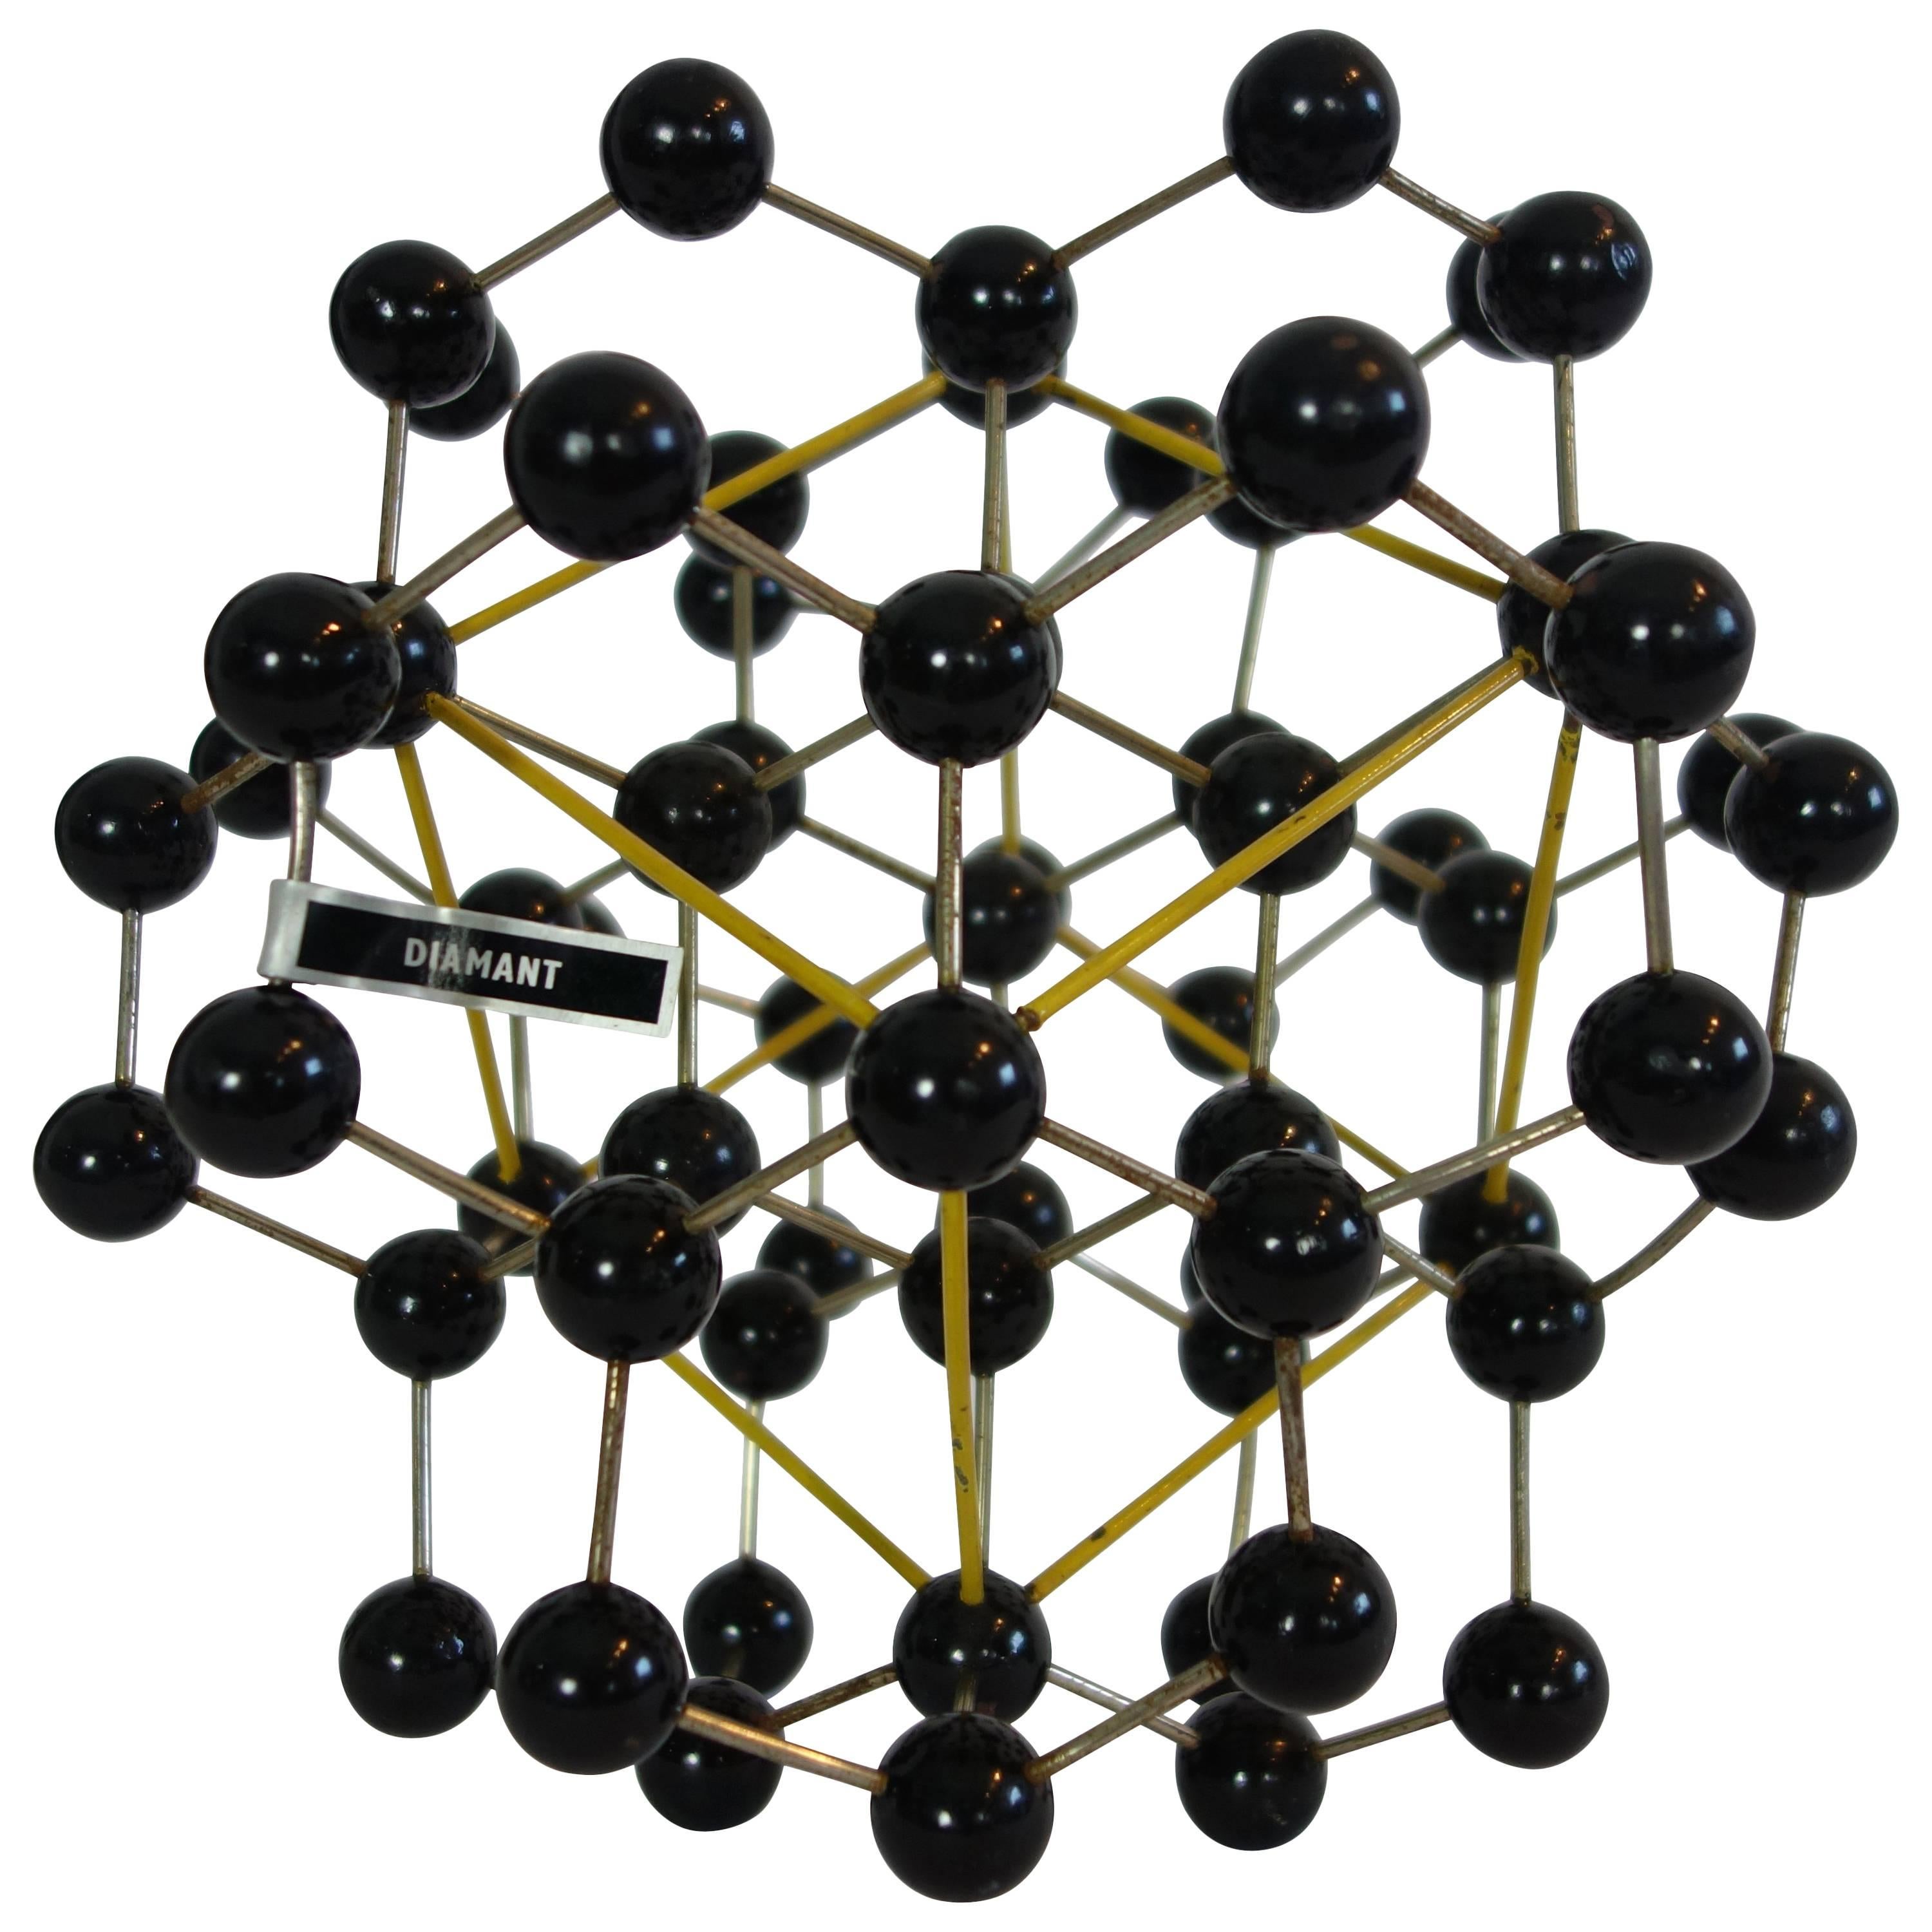 1950s Molecular Structure of a Diamond from France